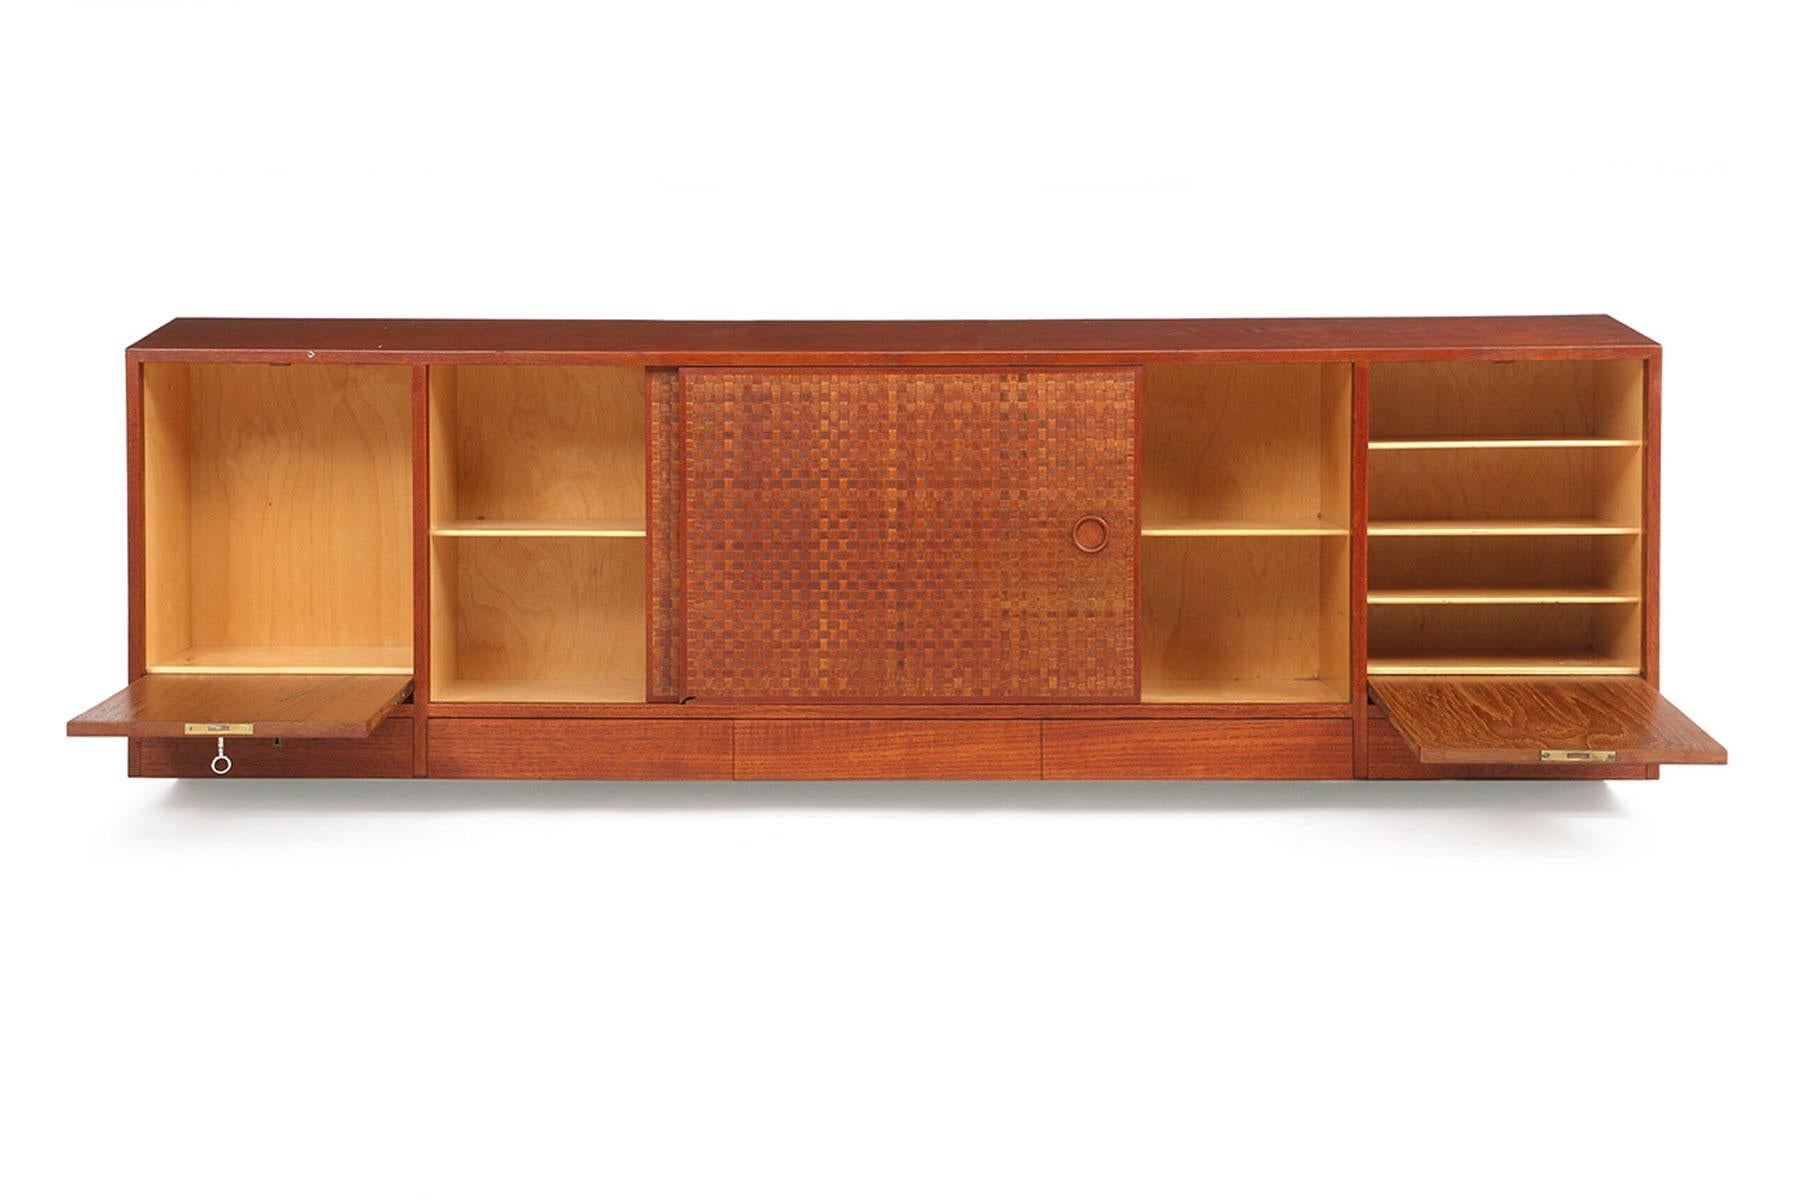 Origin: Denmark
Designer: Unknown
Manufacturer: Unknown - Retailed at Illums Bolighus in the 1950s
Era: 1950s
Materials: Teak
Dimensions: 73” wide x 12” deep x 21.5” tall 

Condition: In good original condition with some cosmetic wear (will